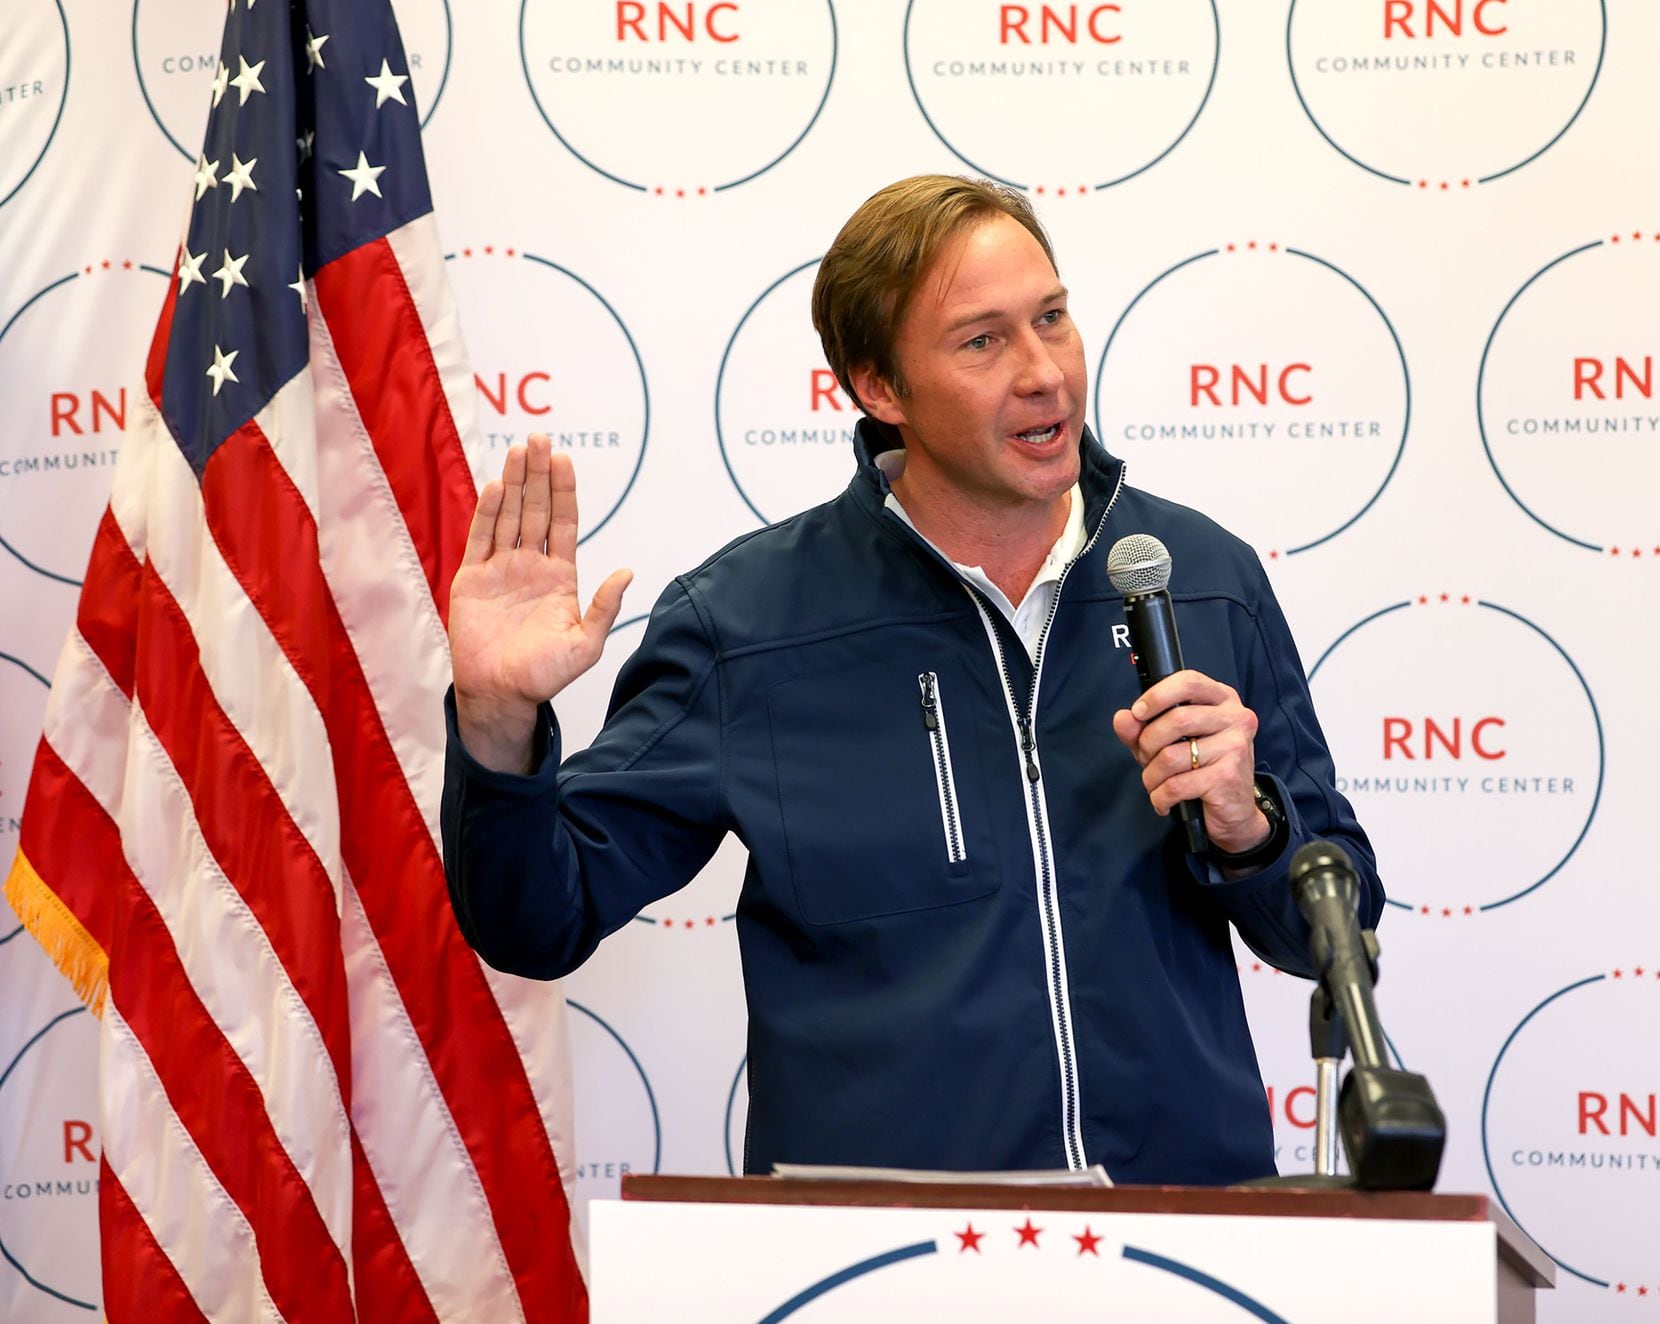 Republican National Committee opens community center in Dallas area.  Tommy Hicks Jr, co-chair of the Republican National Committee.  (Steve Nurenberg / Special Contributor)